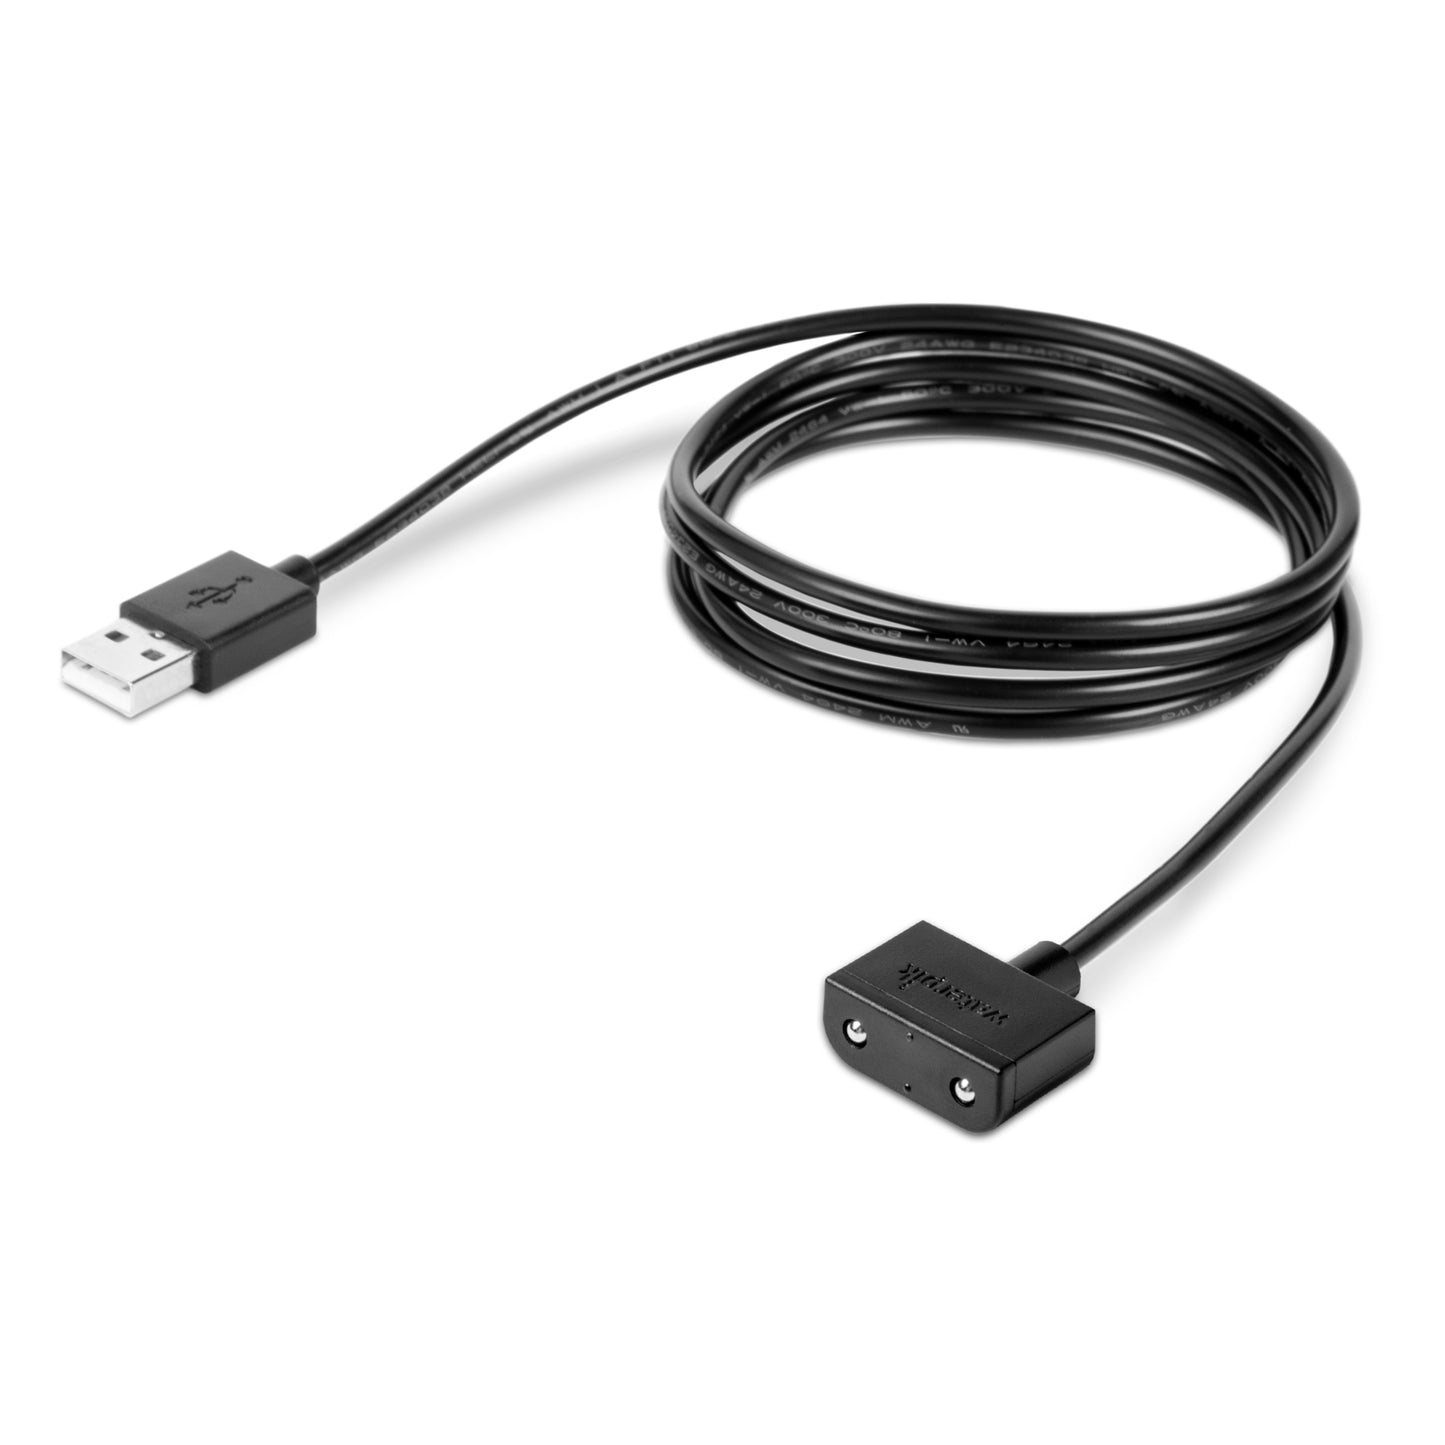 Black Magnetic USB-A Charging Cable for Waterpik ION Cordless Water Flosser, WF-11/Wf-12